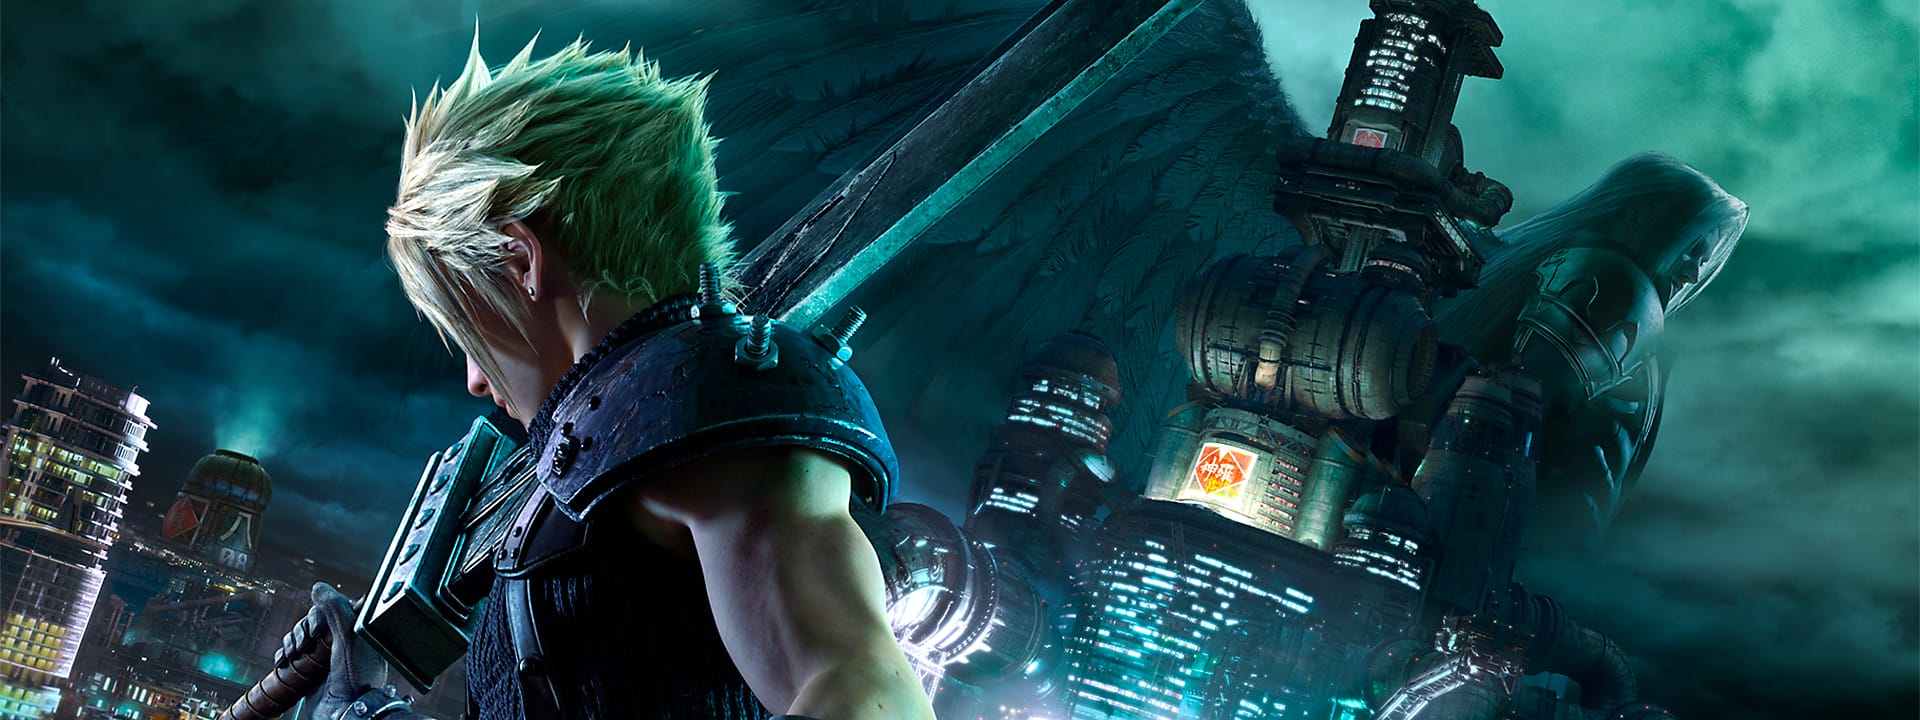 Final Fantasy 7 Was the Best Selling Game on PS4 Store in April